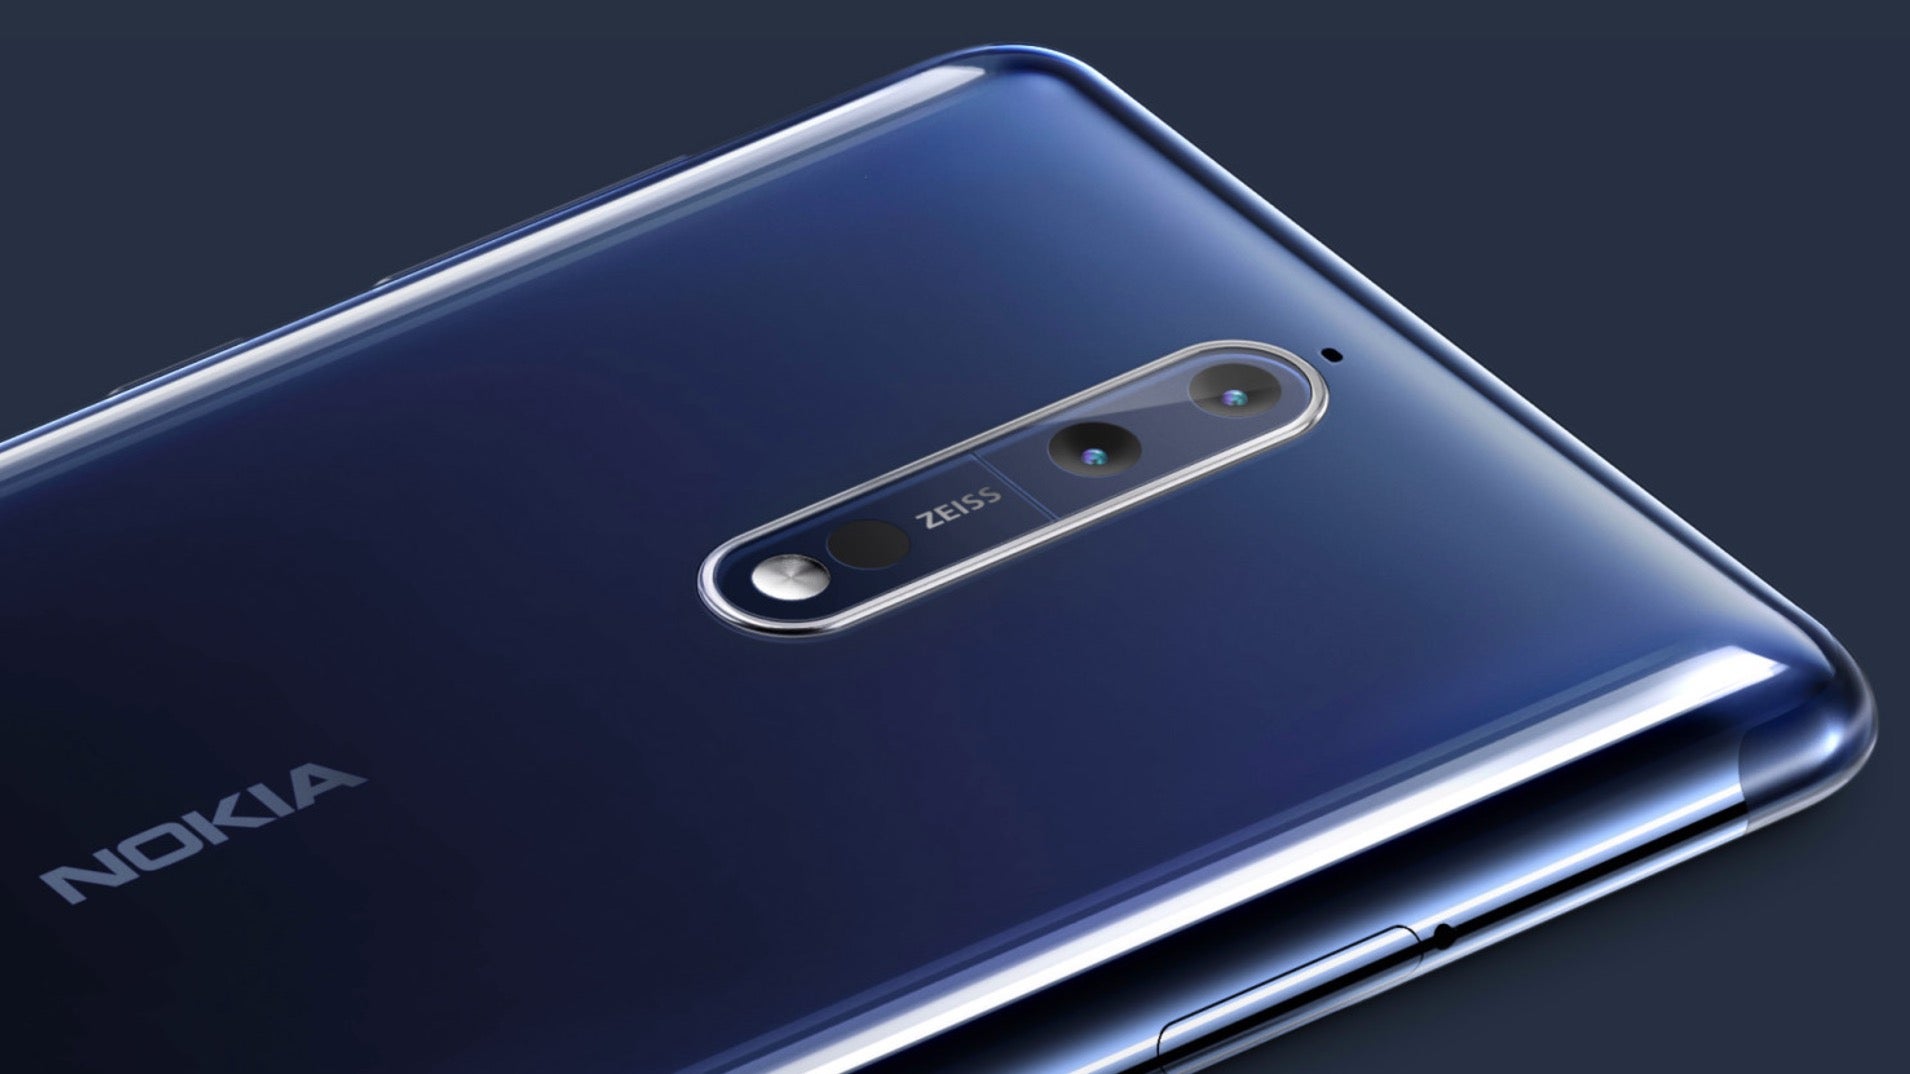 Nokia 8 cameras explained: how does the dual camera work and what is a "#Bothie"